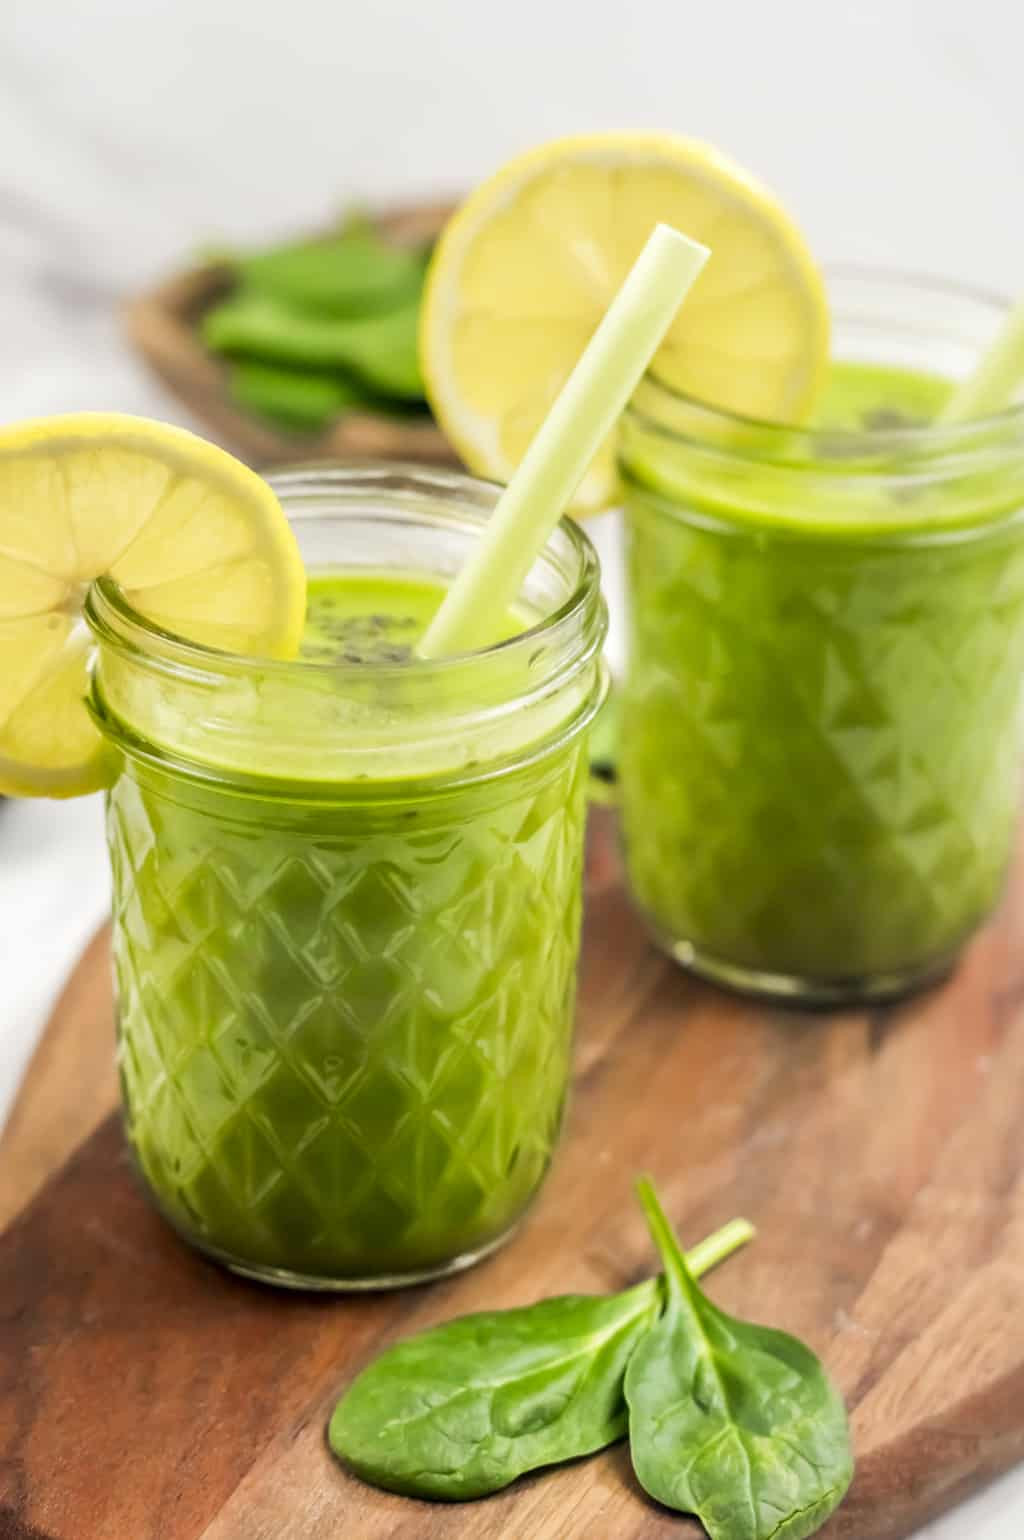 Healthy Smoothie Recipes With Spinach
 10 Easy Healthy Smoothie Recipes Your Whole Family Will Love